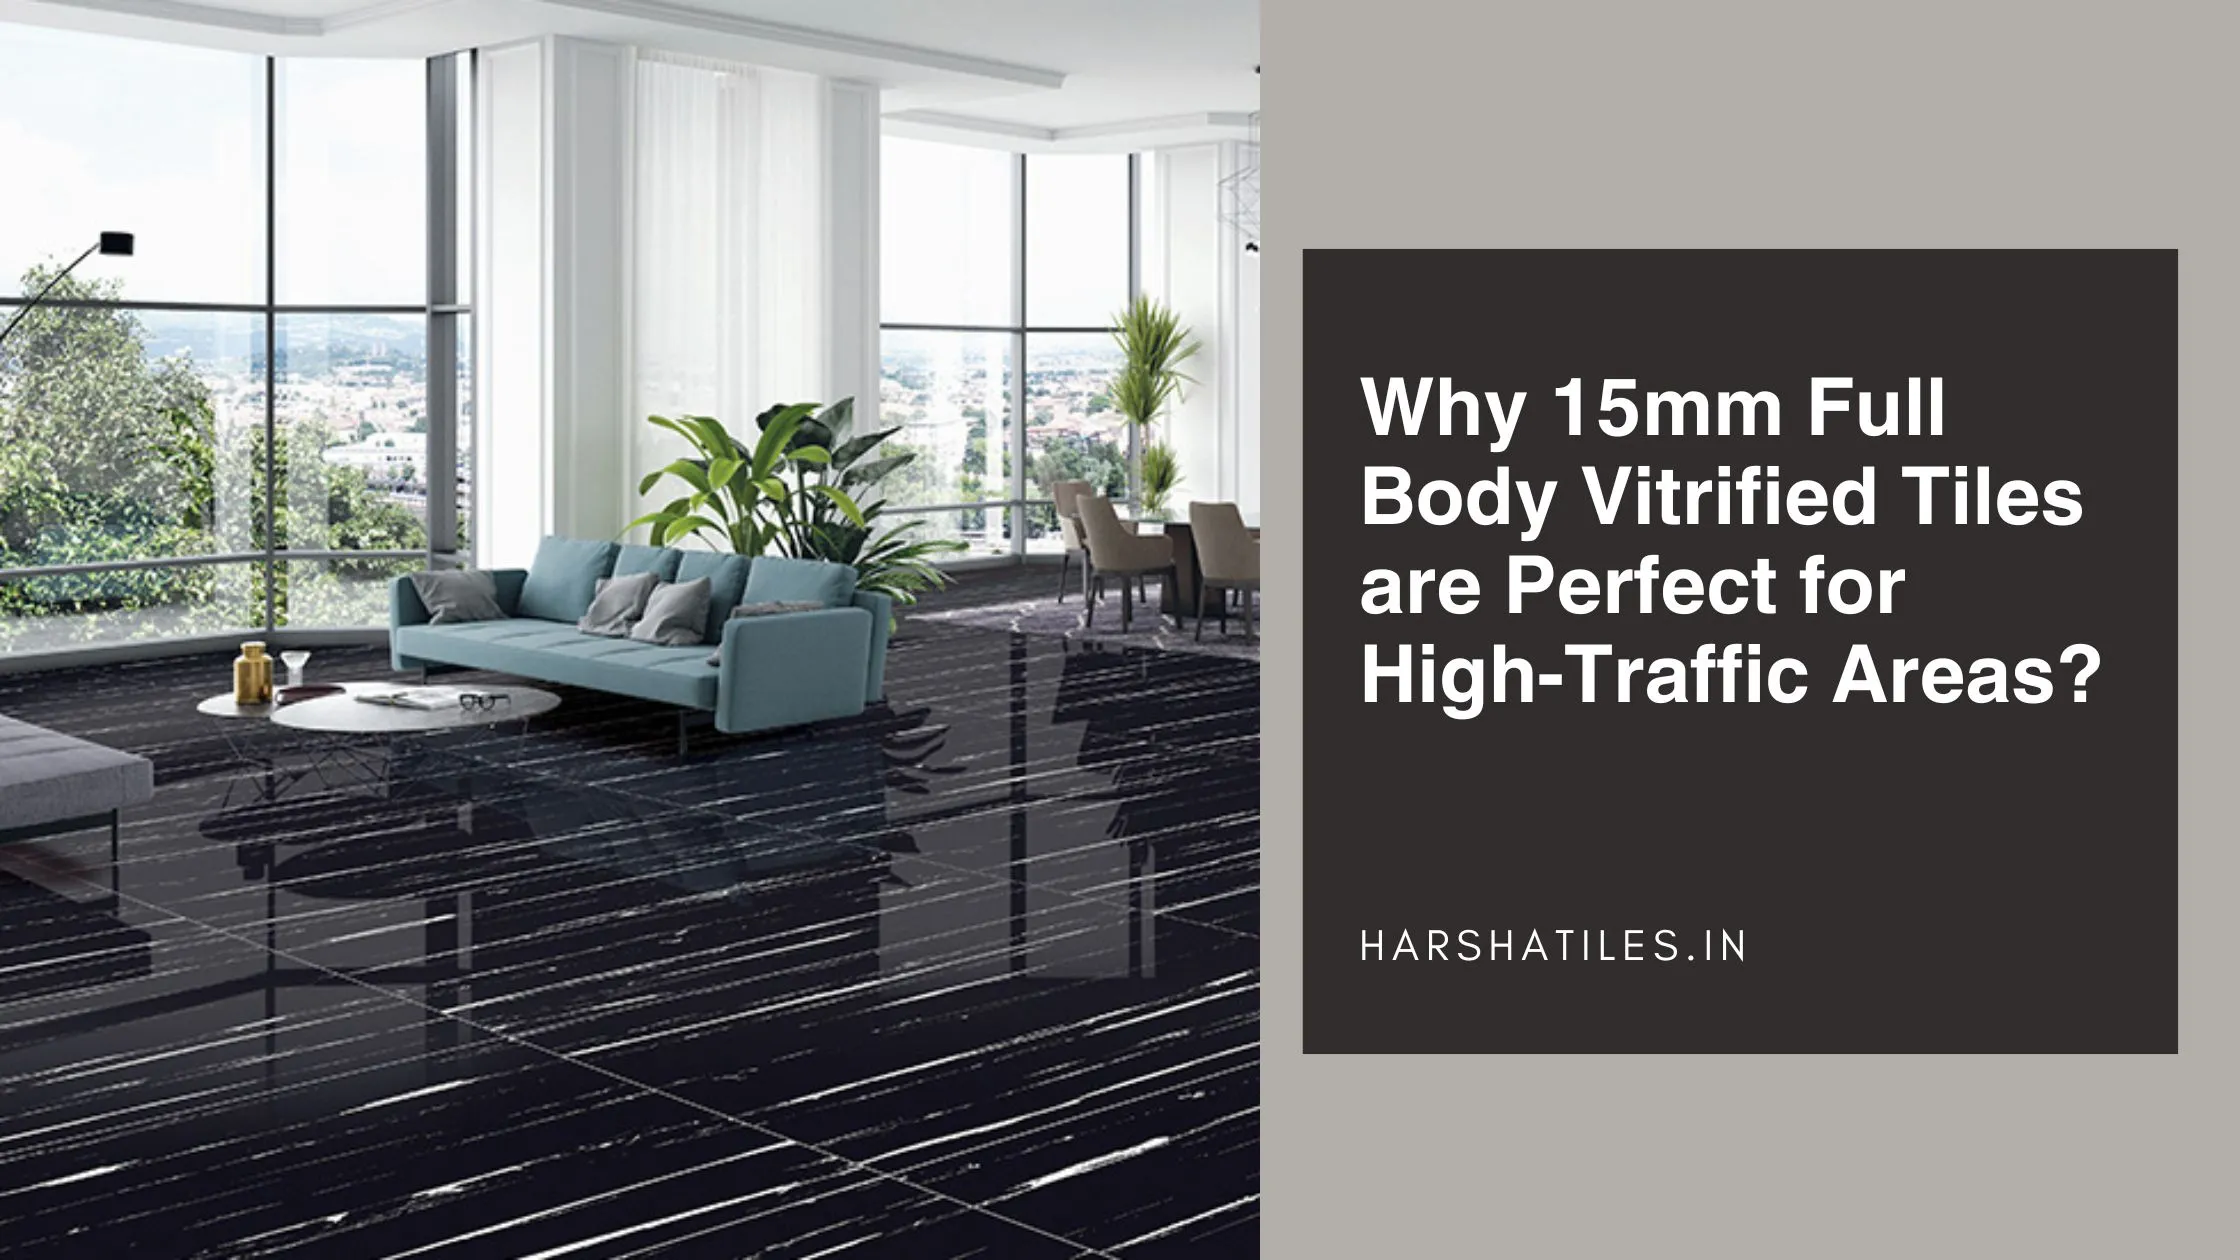 Why 15mm Full Body Vitrified Tiles are Perfect for High-Traffic Areas?